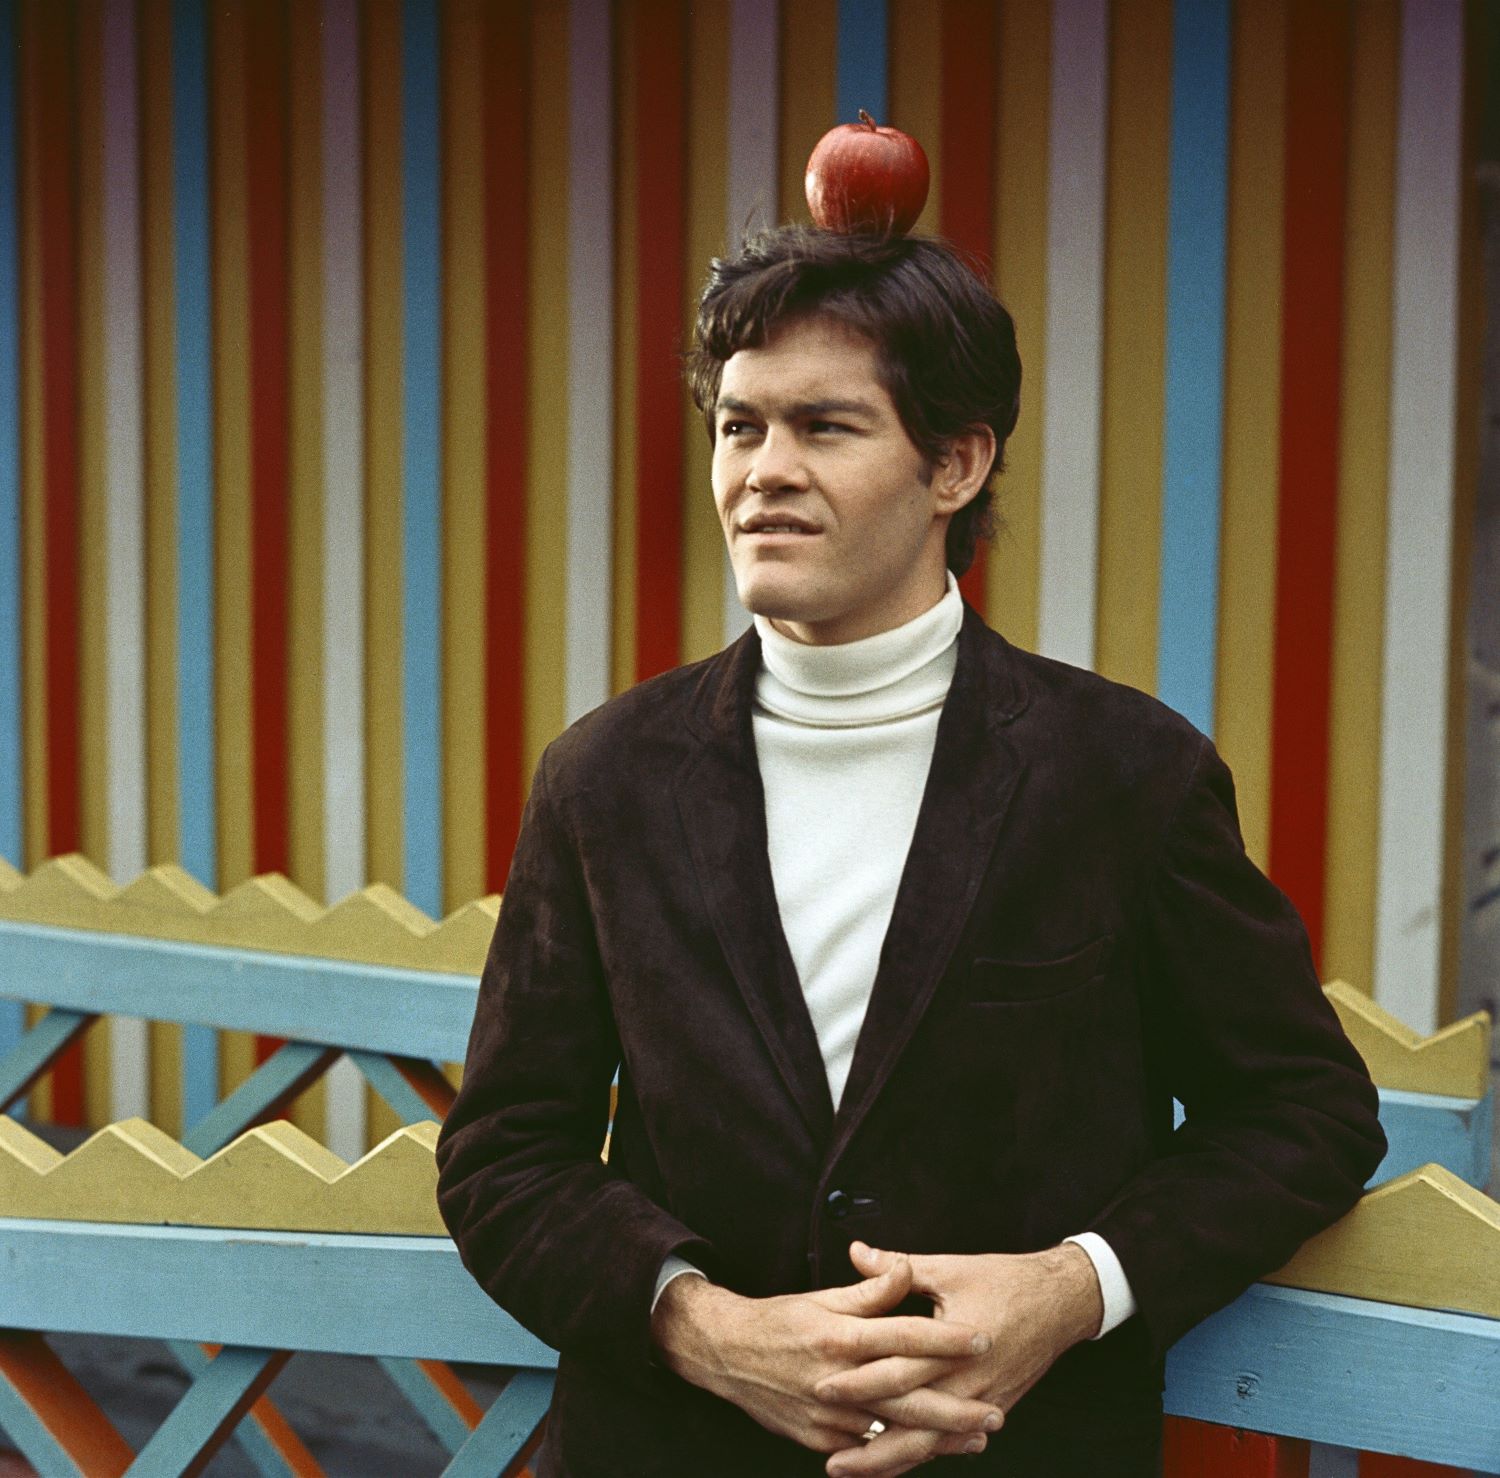 Micky Dolenz of The Monkees